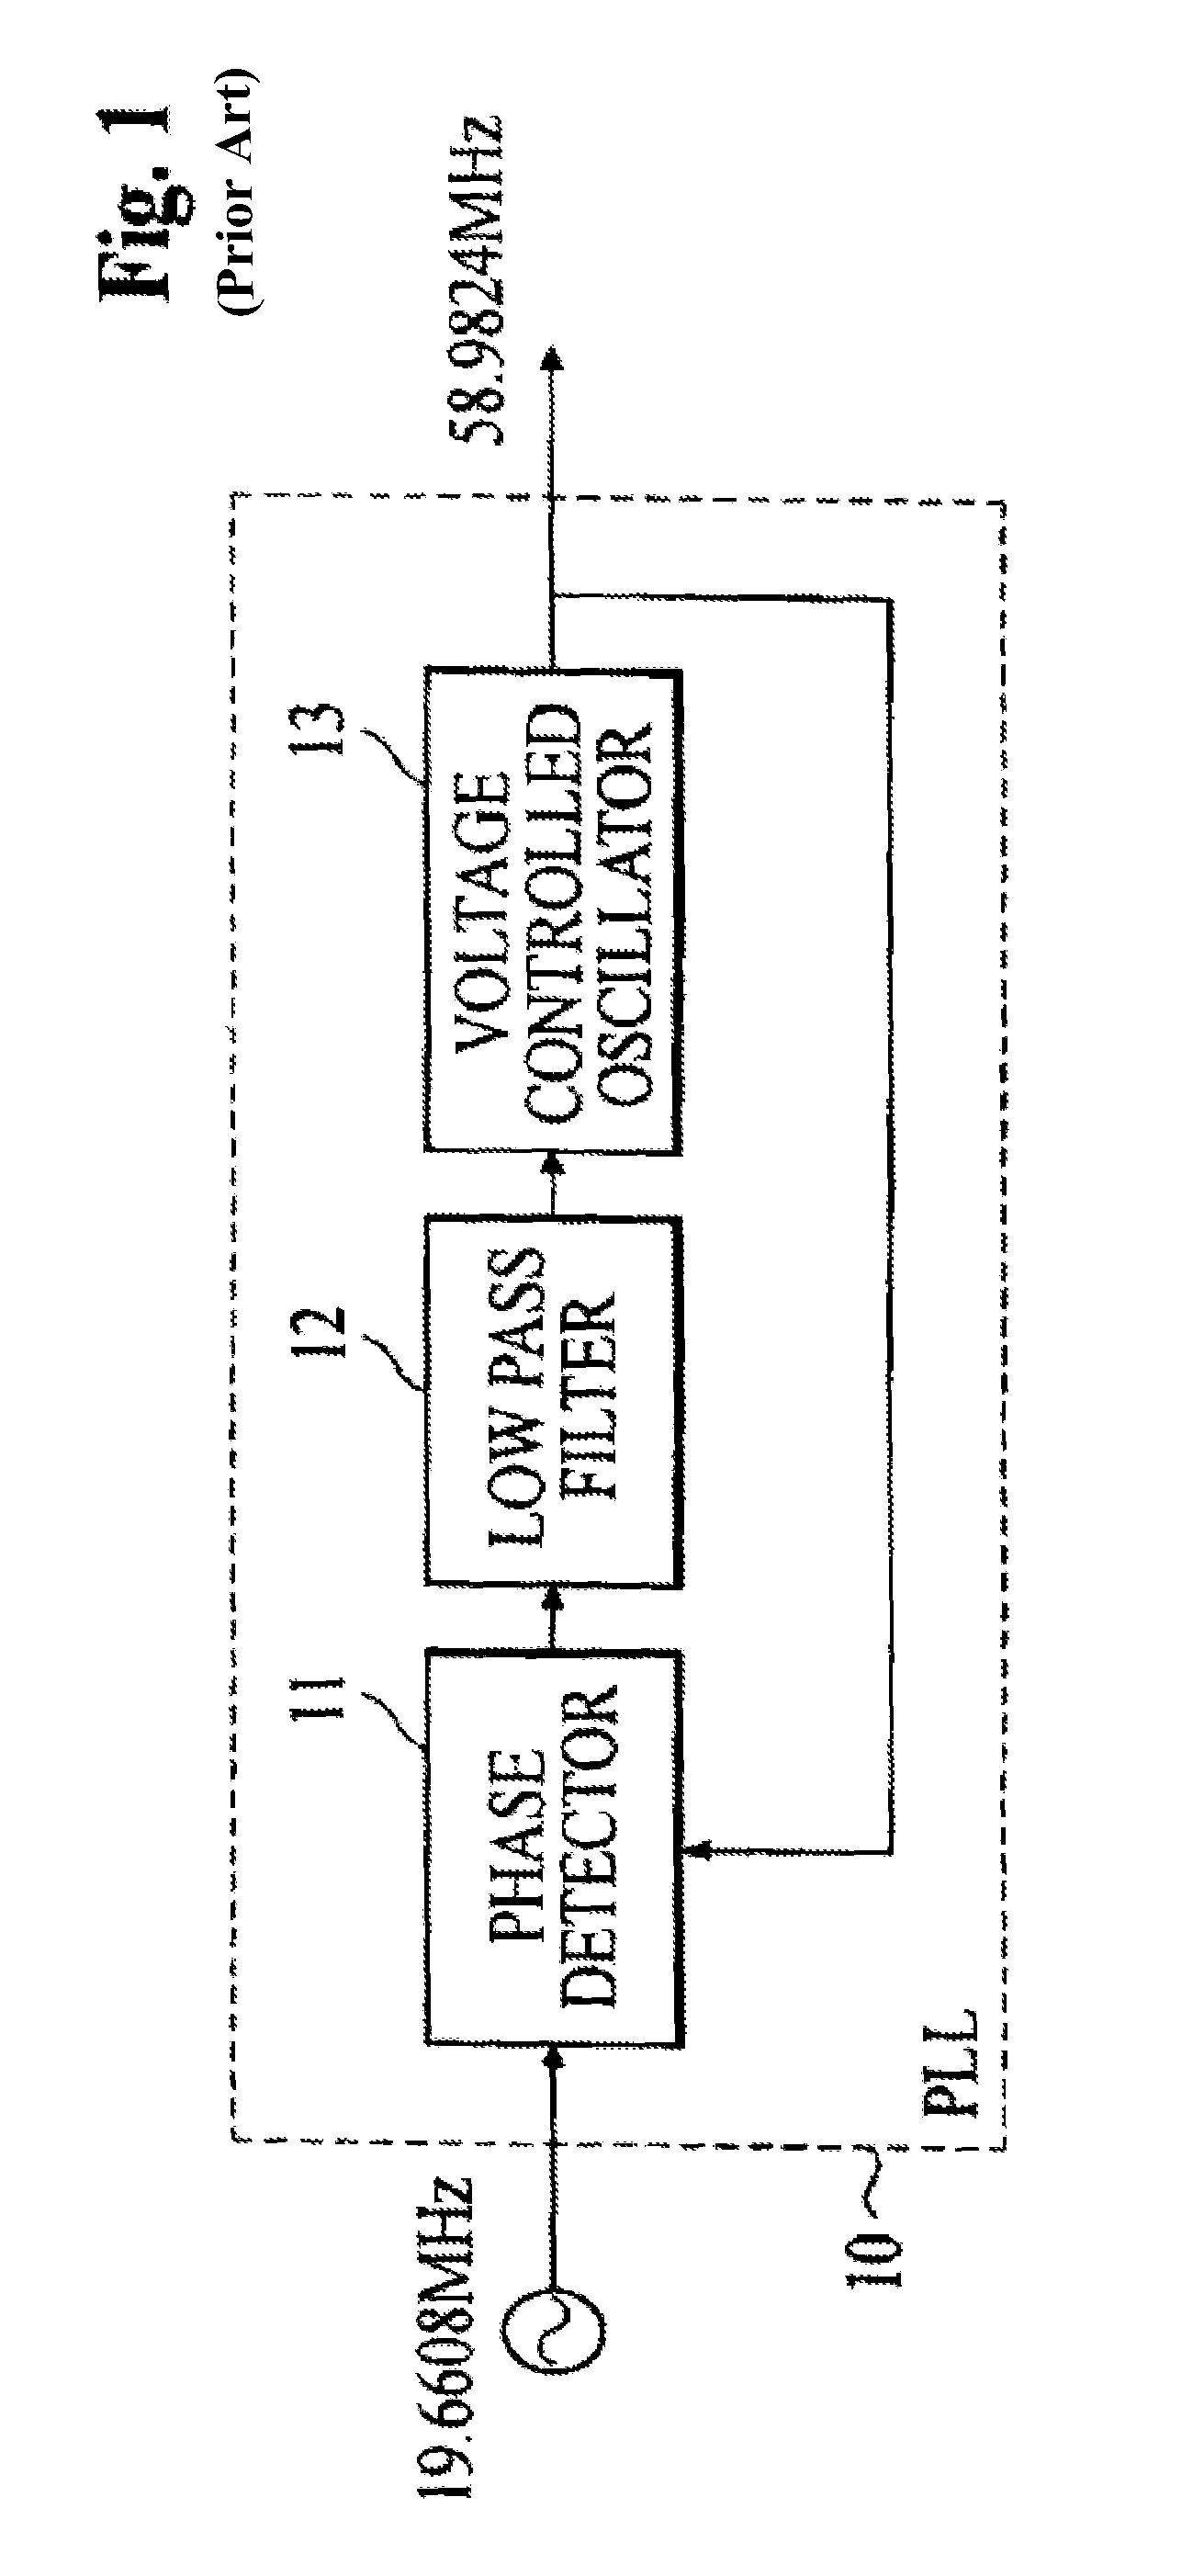 Apparatus for generating clock pulses using a direct digital synthesizer